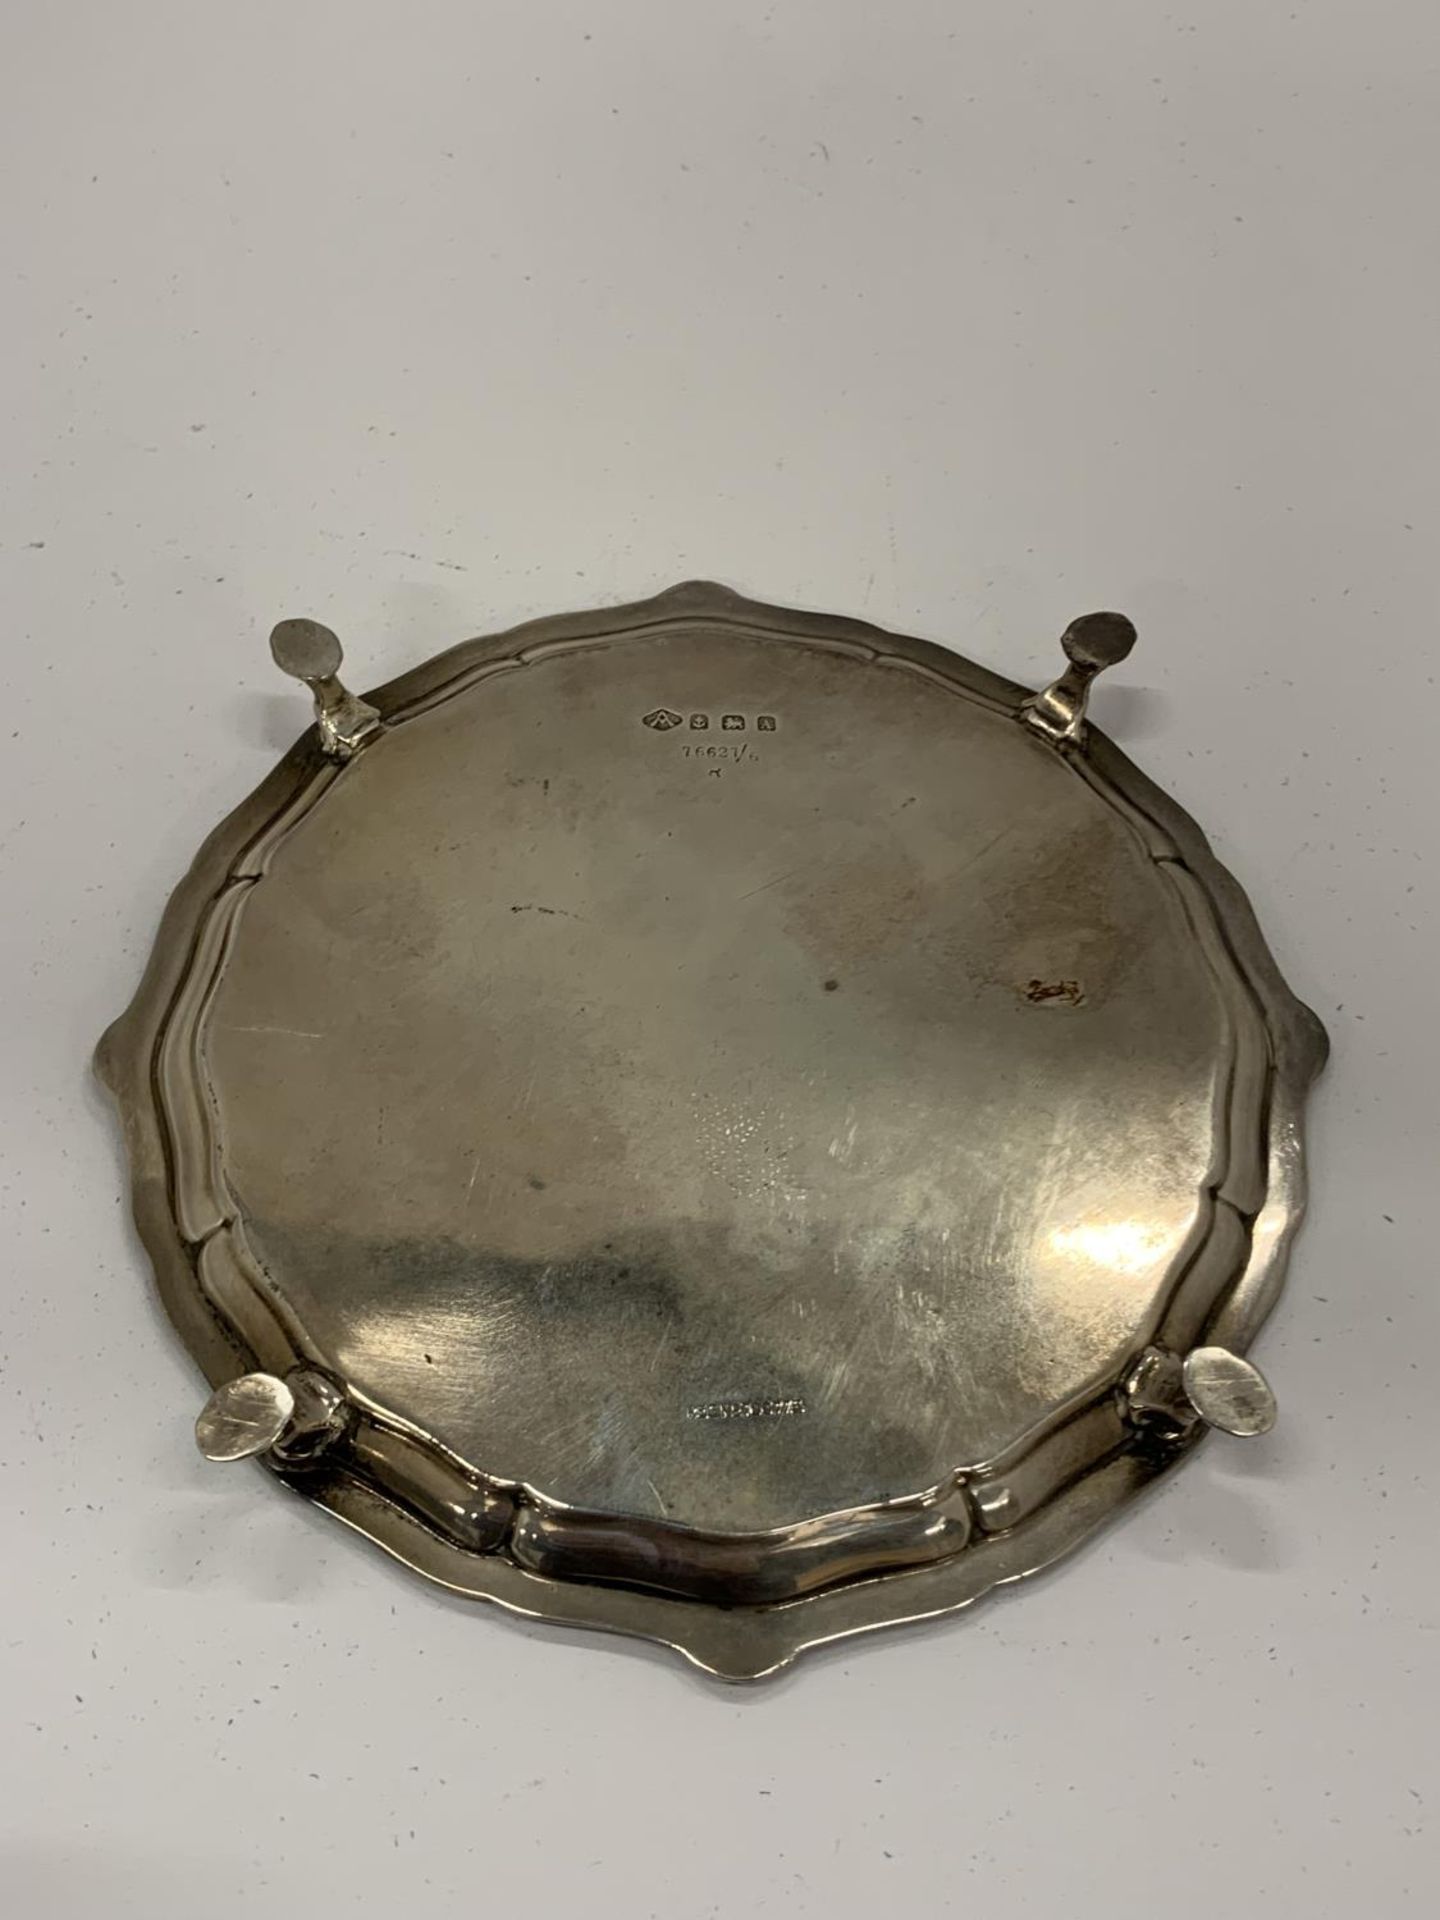 A GEORGE V SILVER SALVER / CARD TRAY, HALLMARKS FOR BIRMINGHAM, 1925, WEIGHT 175G, WIDTH 15CM - Image 4 of 6